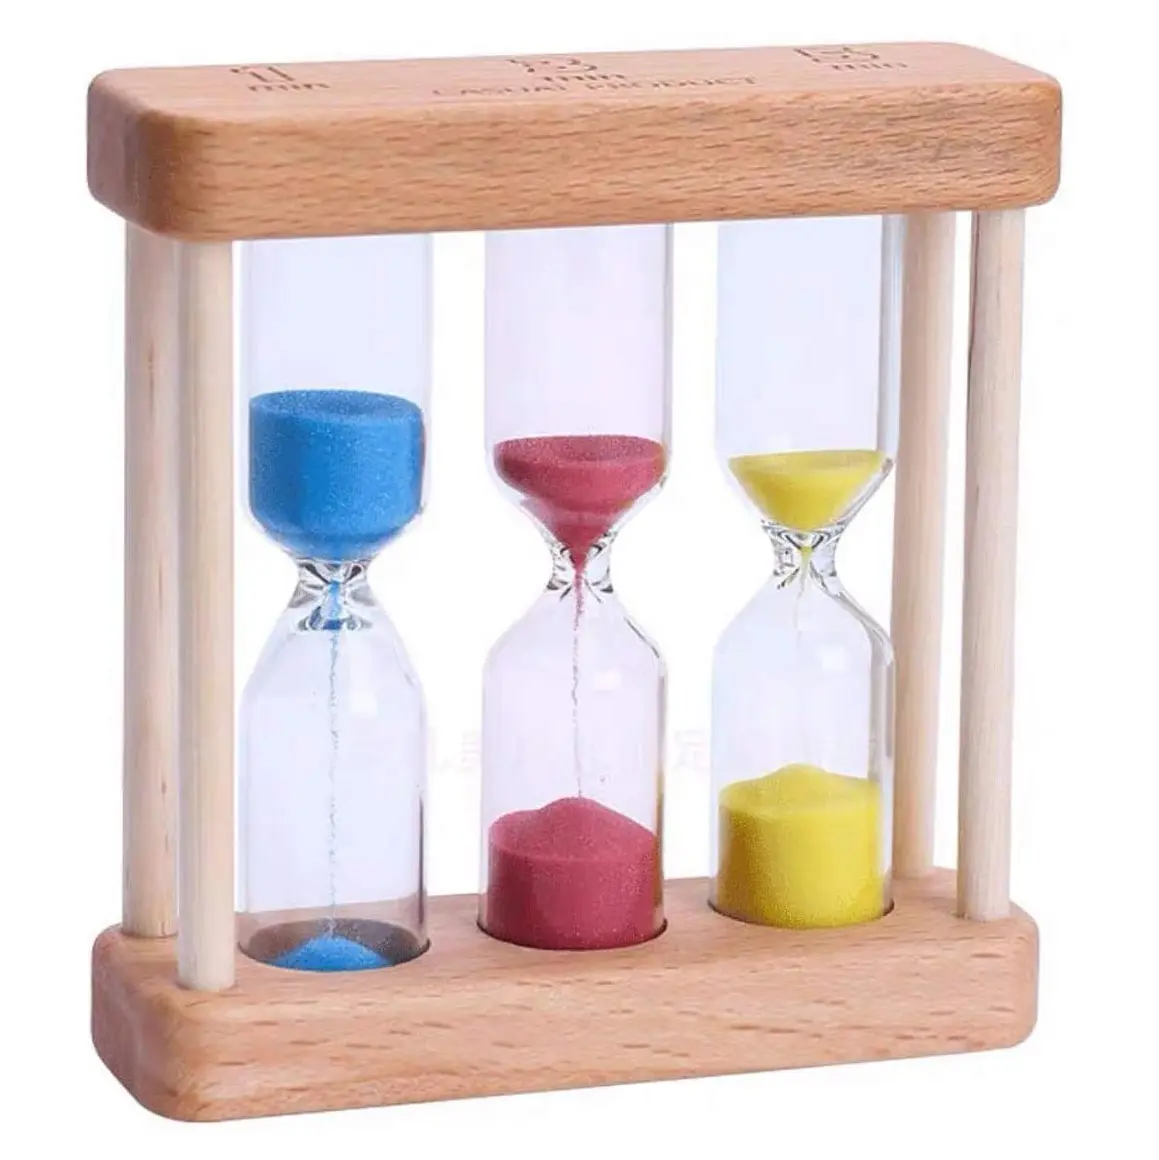 Hot sale mini wooden customized hourglass wood frame hourglass 3 in 1 sand timer hour glass for tea timer